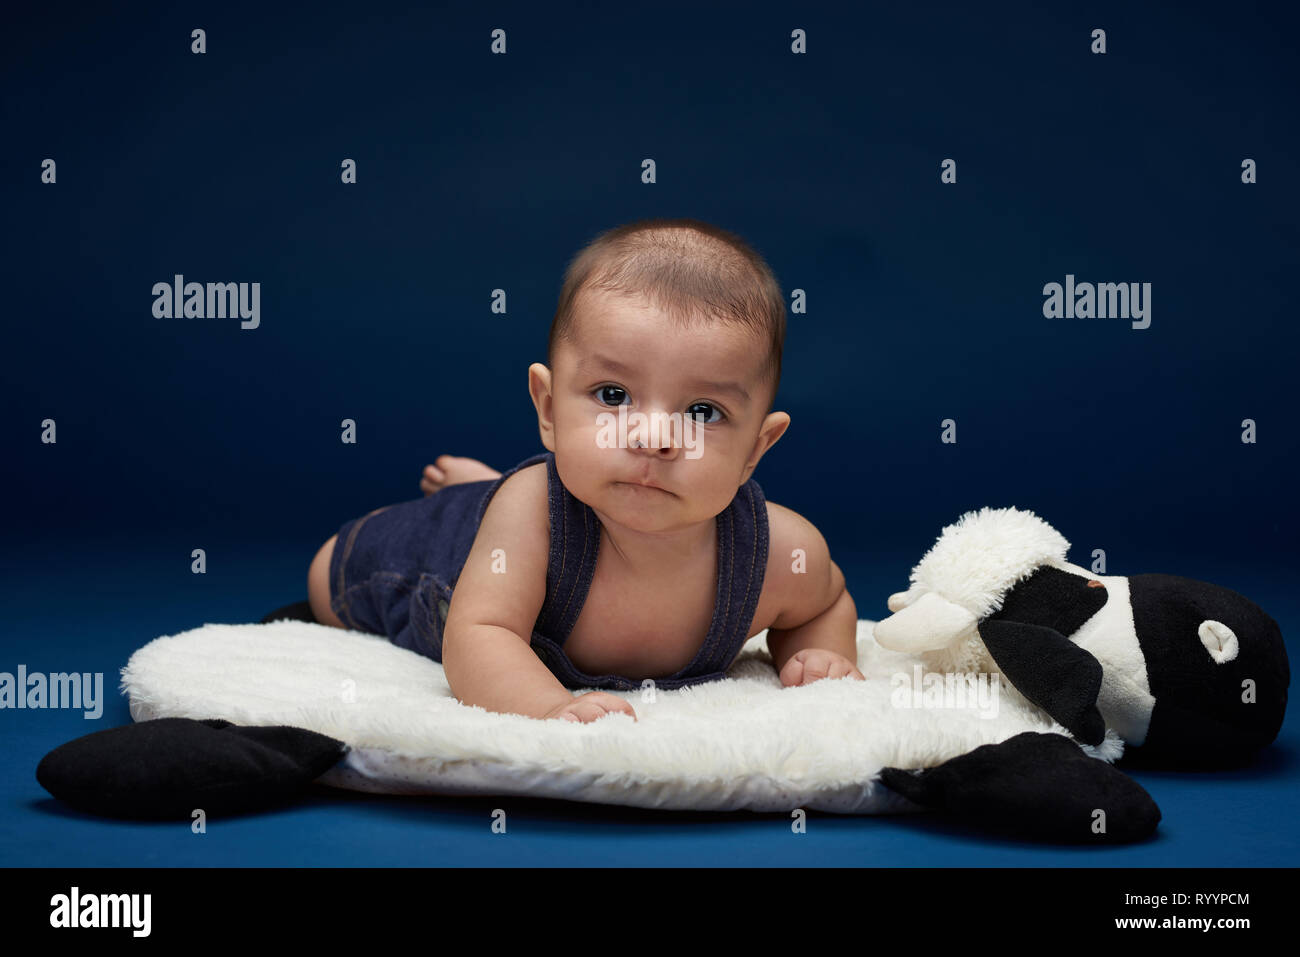 Small child lay on pillow in blue studio background. Kids theme Stock Photo  - Alamy